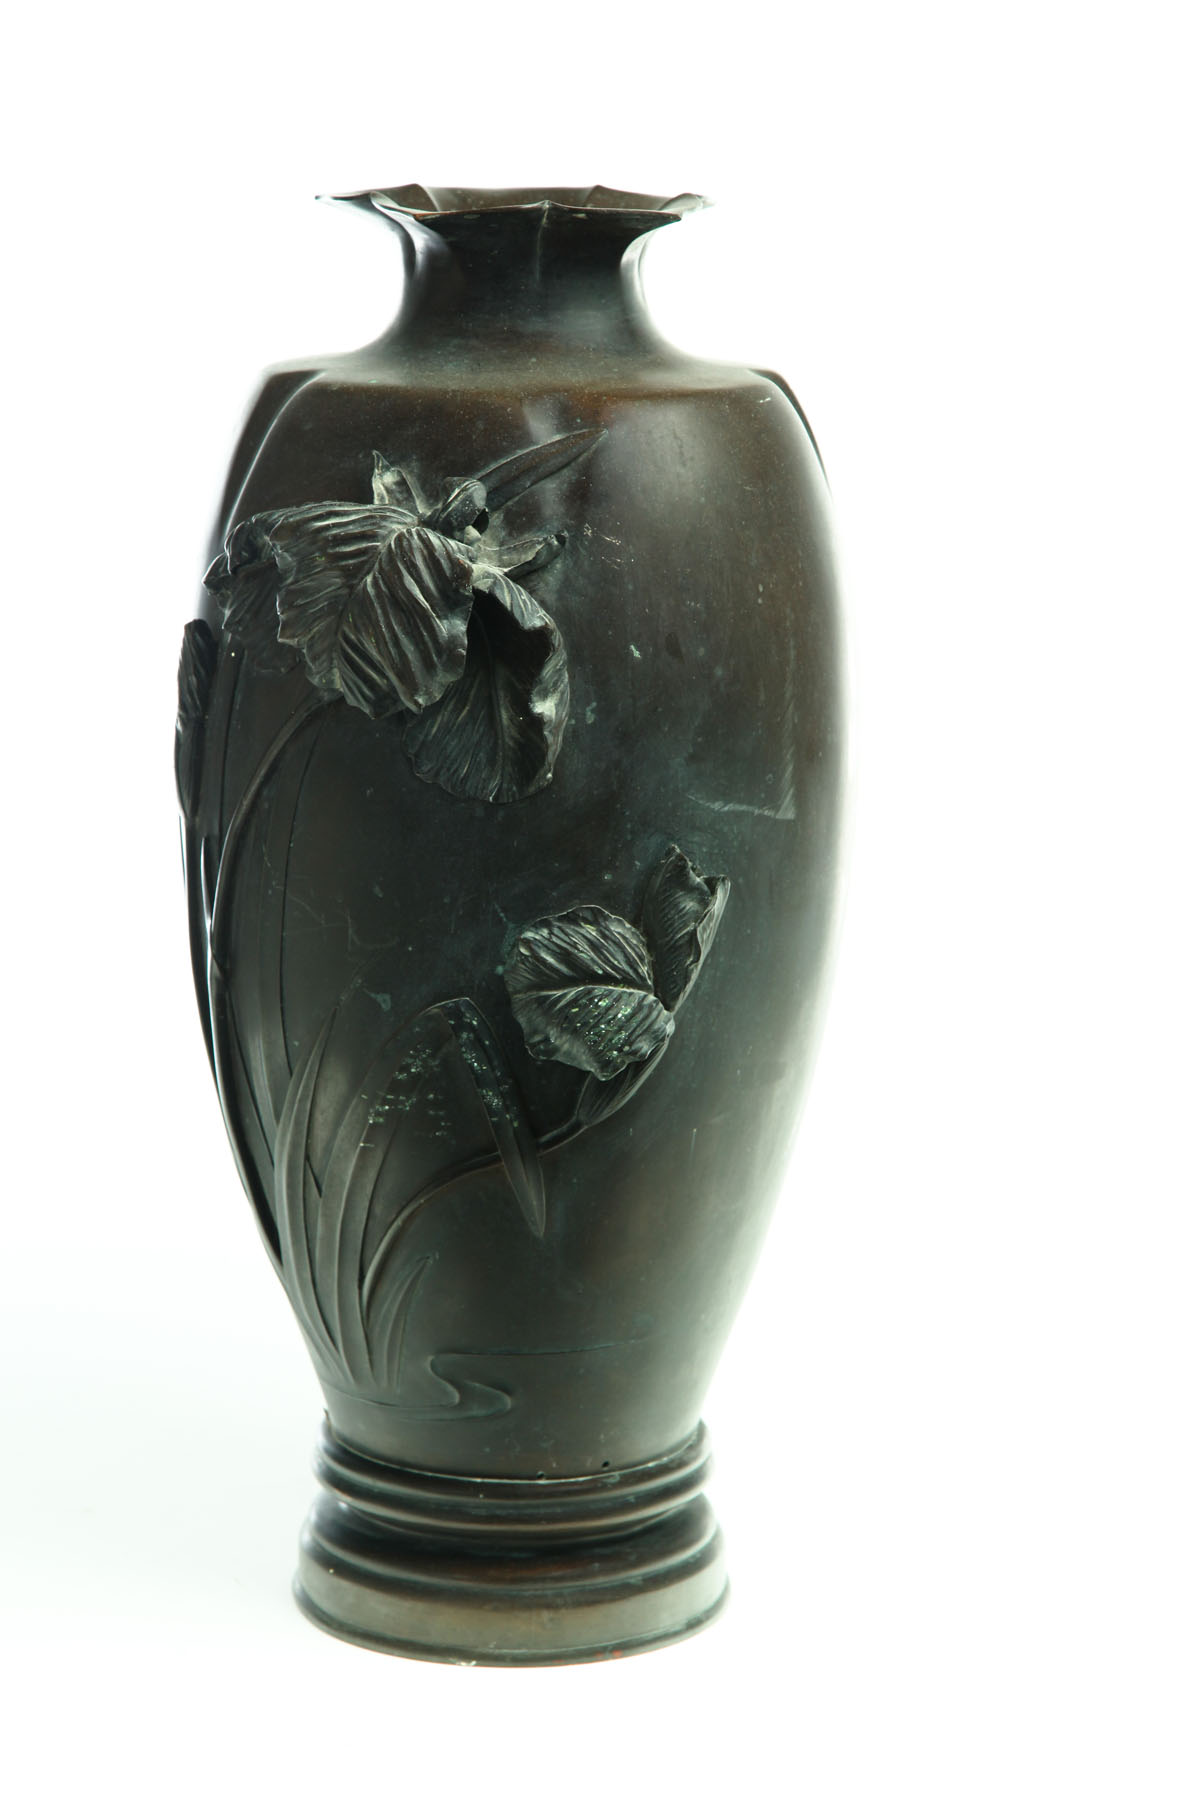 BRONZE VASE.  Japan  early 20th